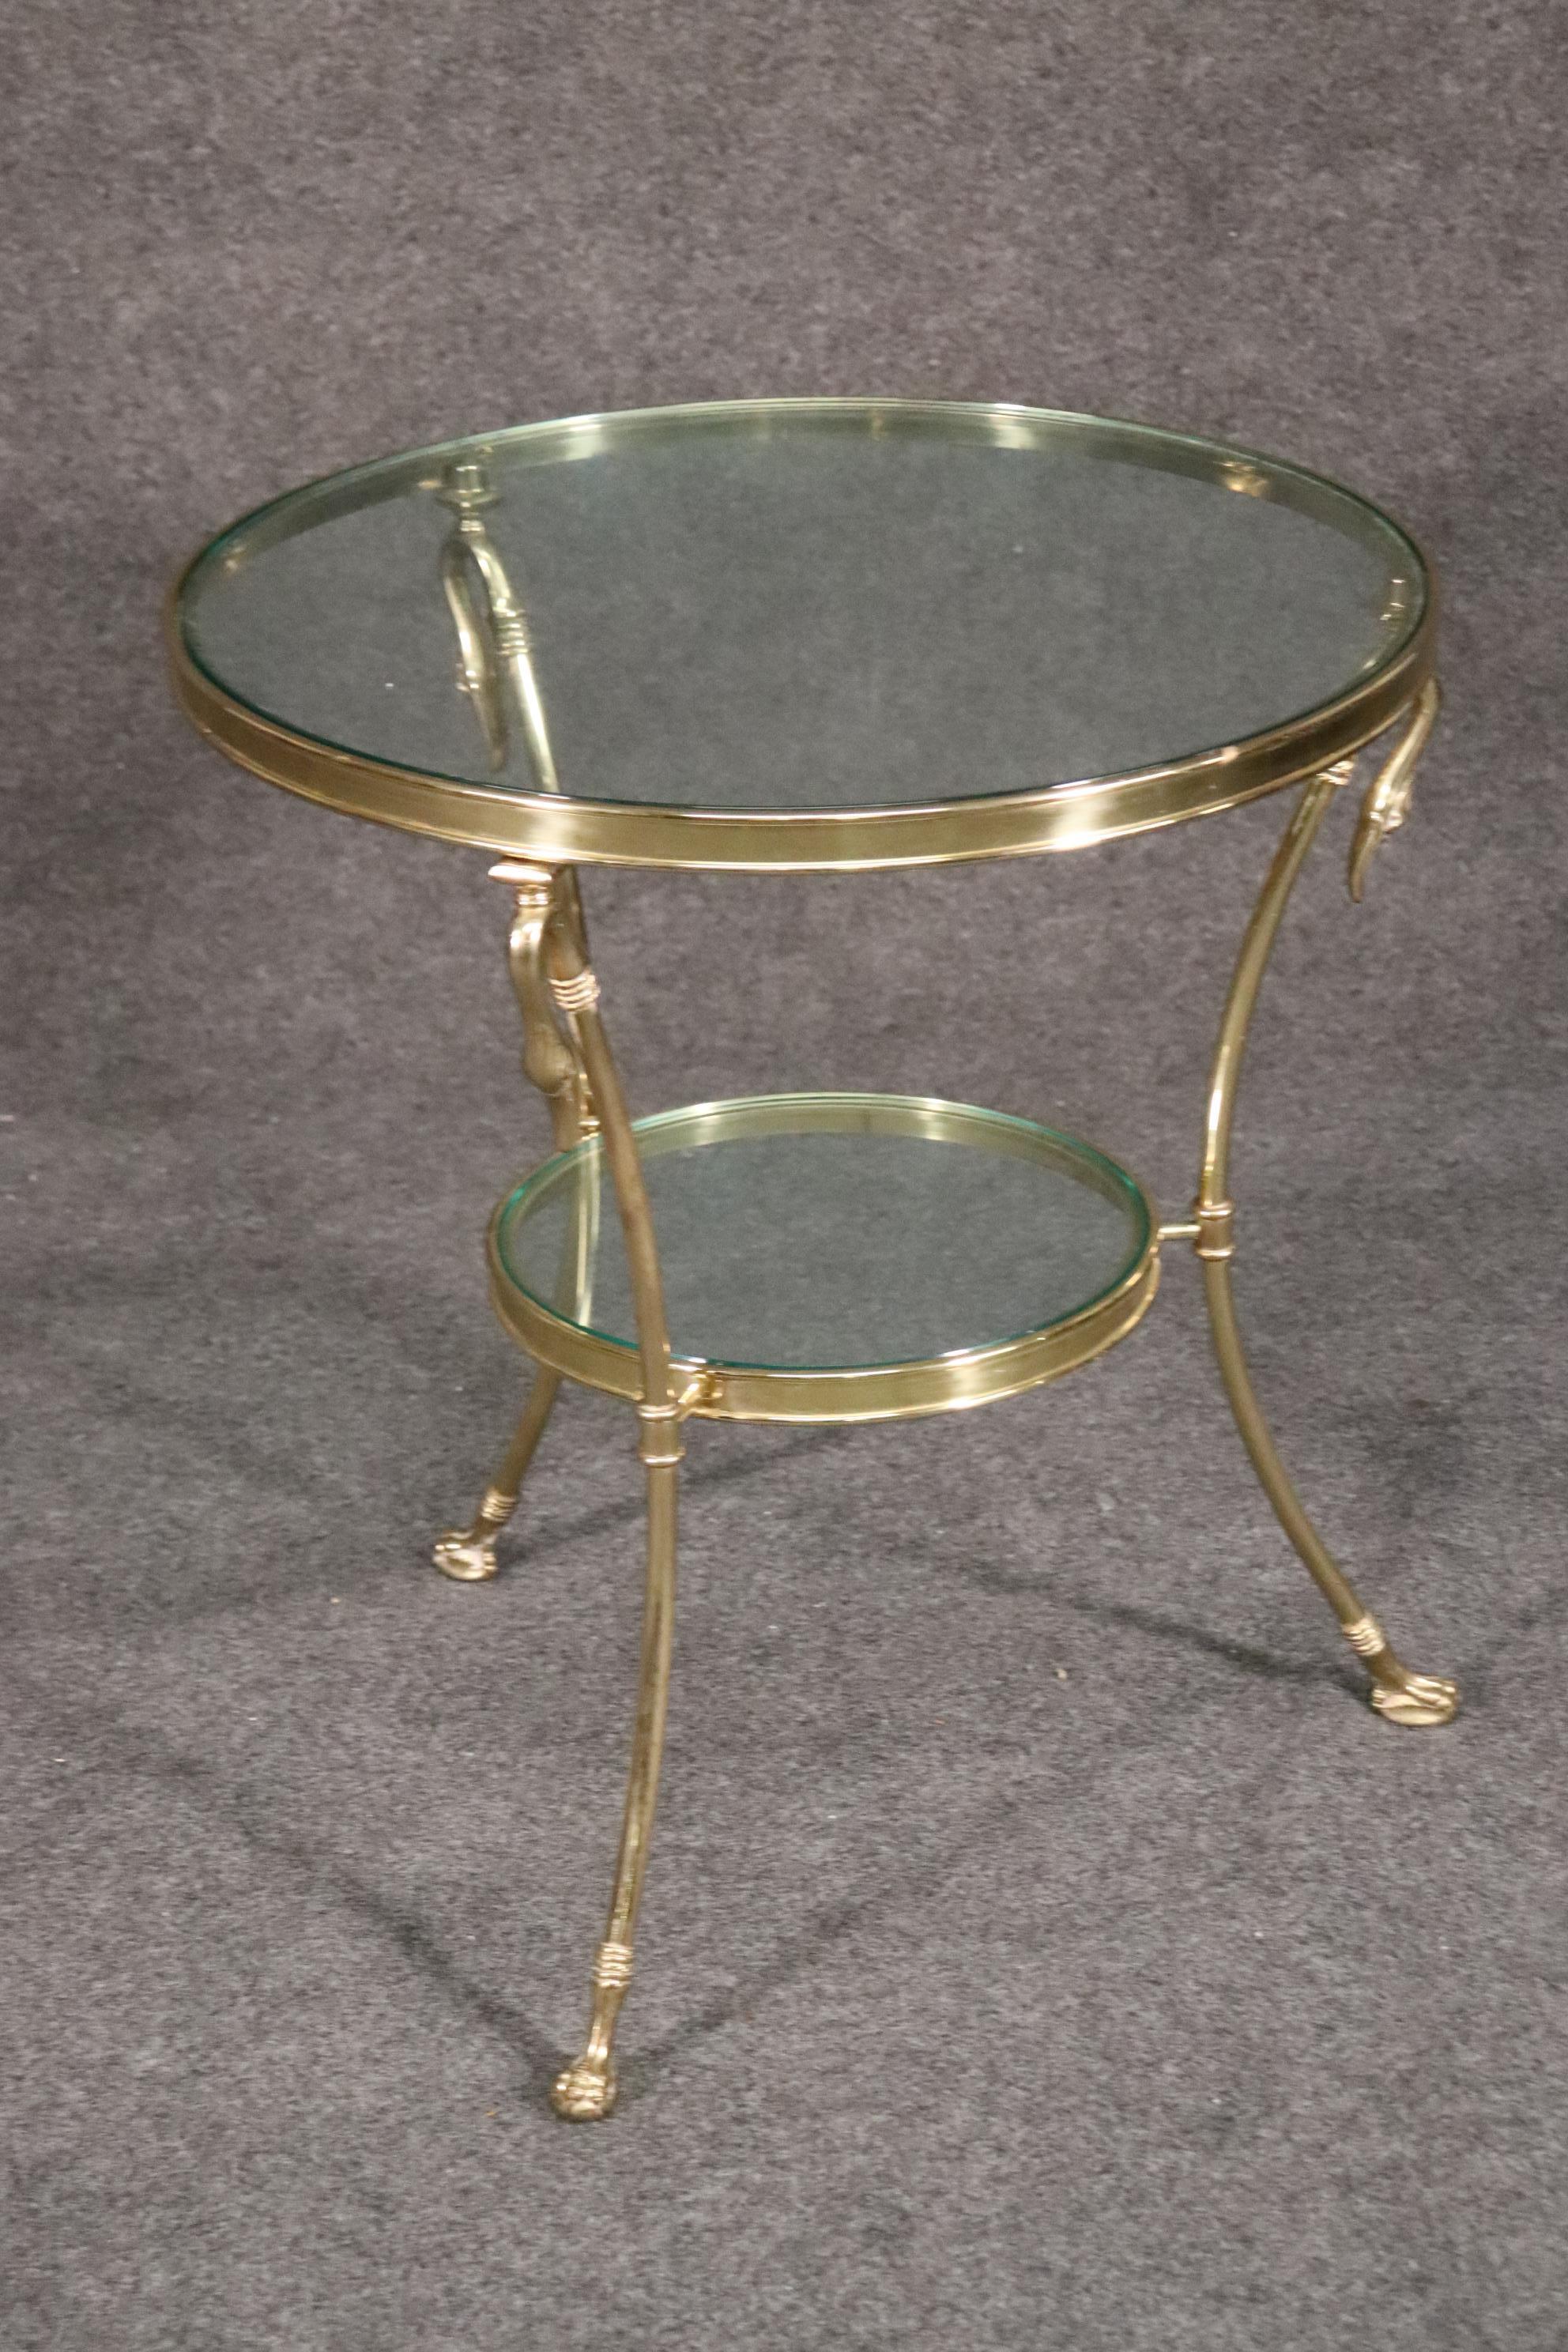 This is a beautiful swan form solid brass gueridon or end table. I have only one table. The table measures 24 x 24 wide x 28 tall.